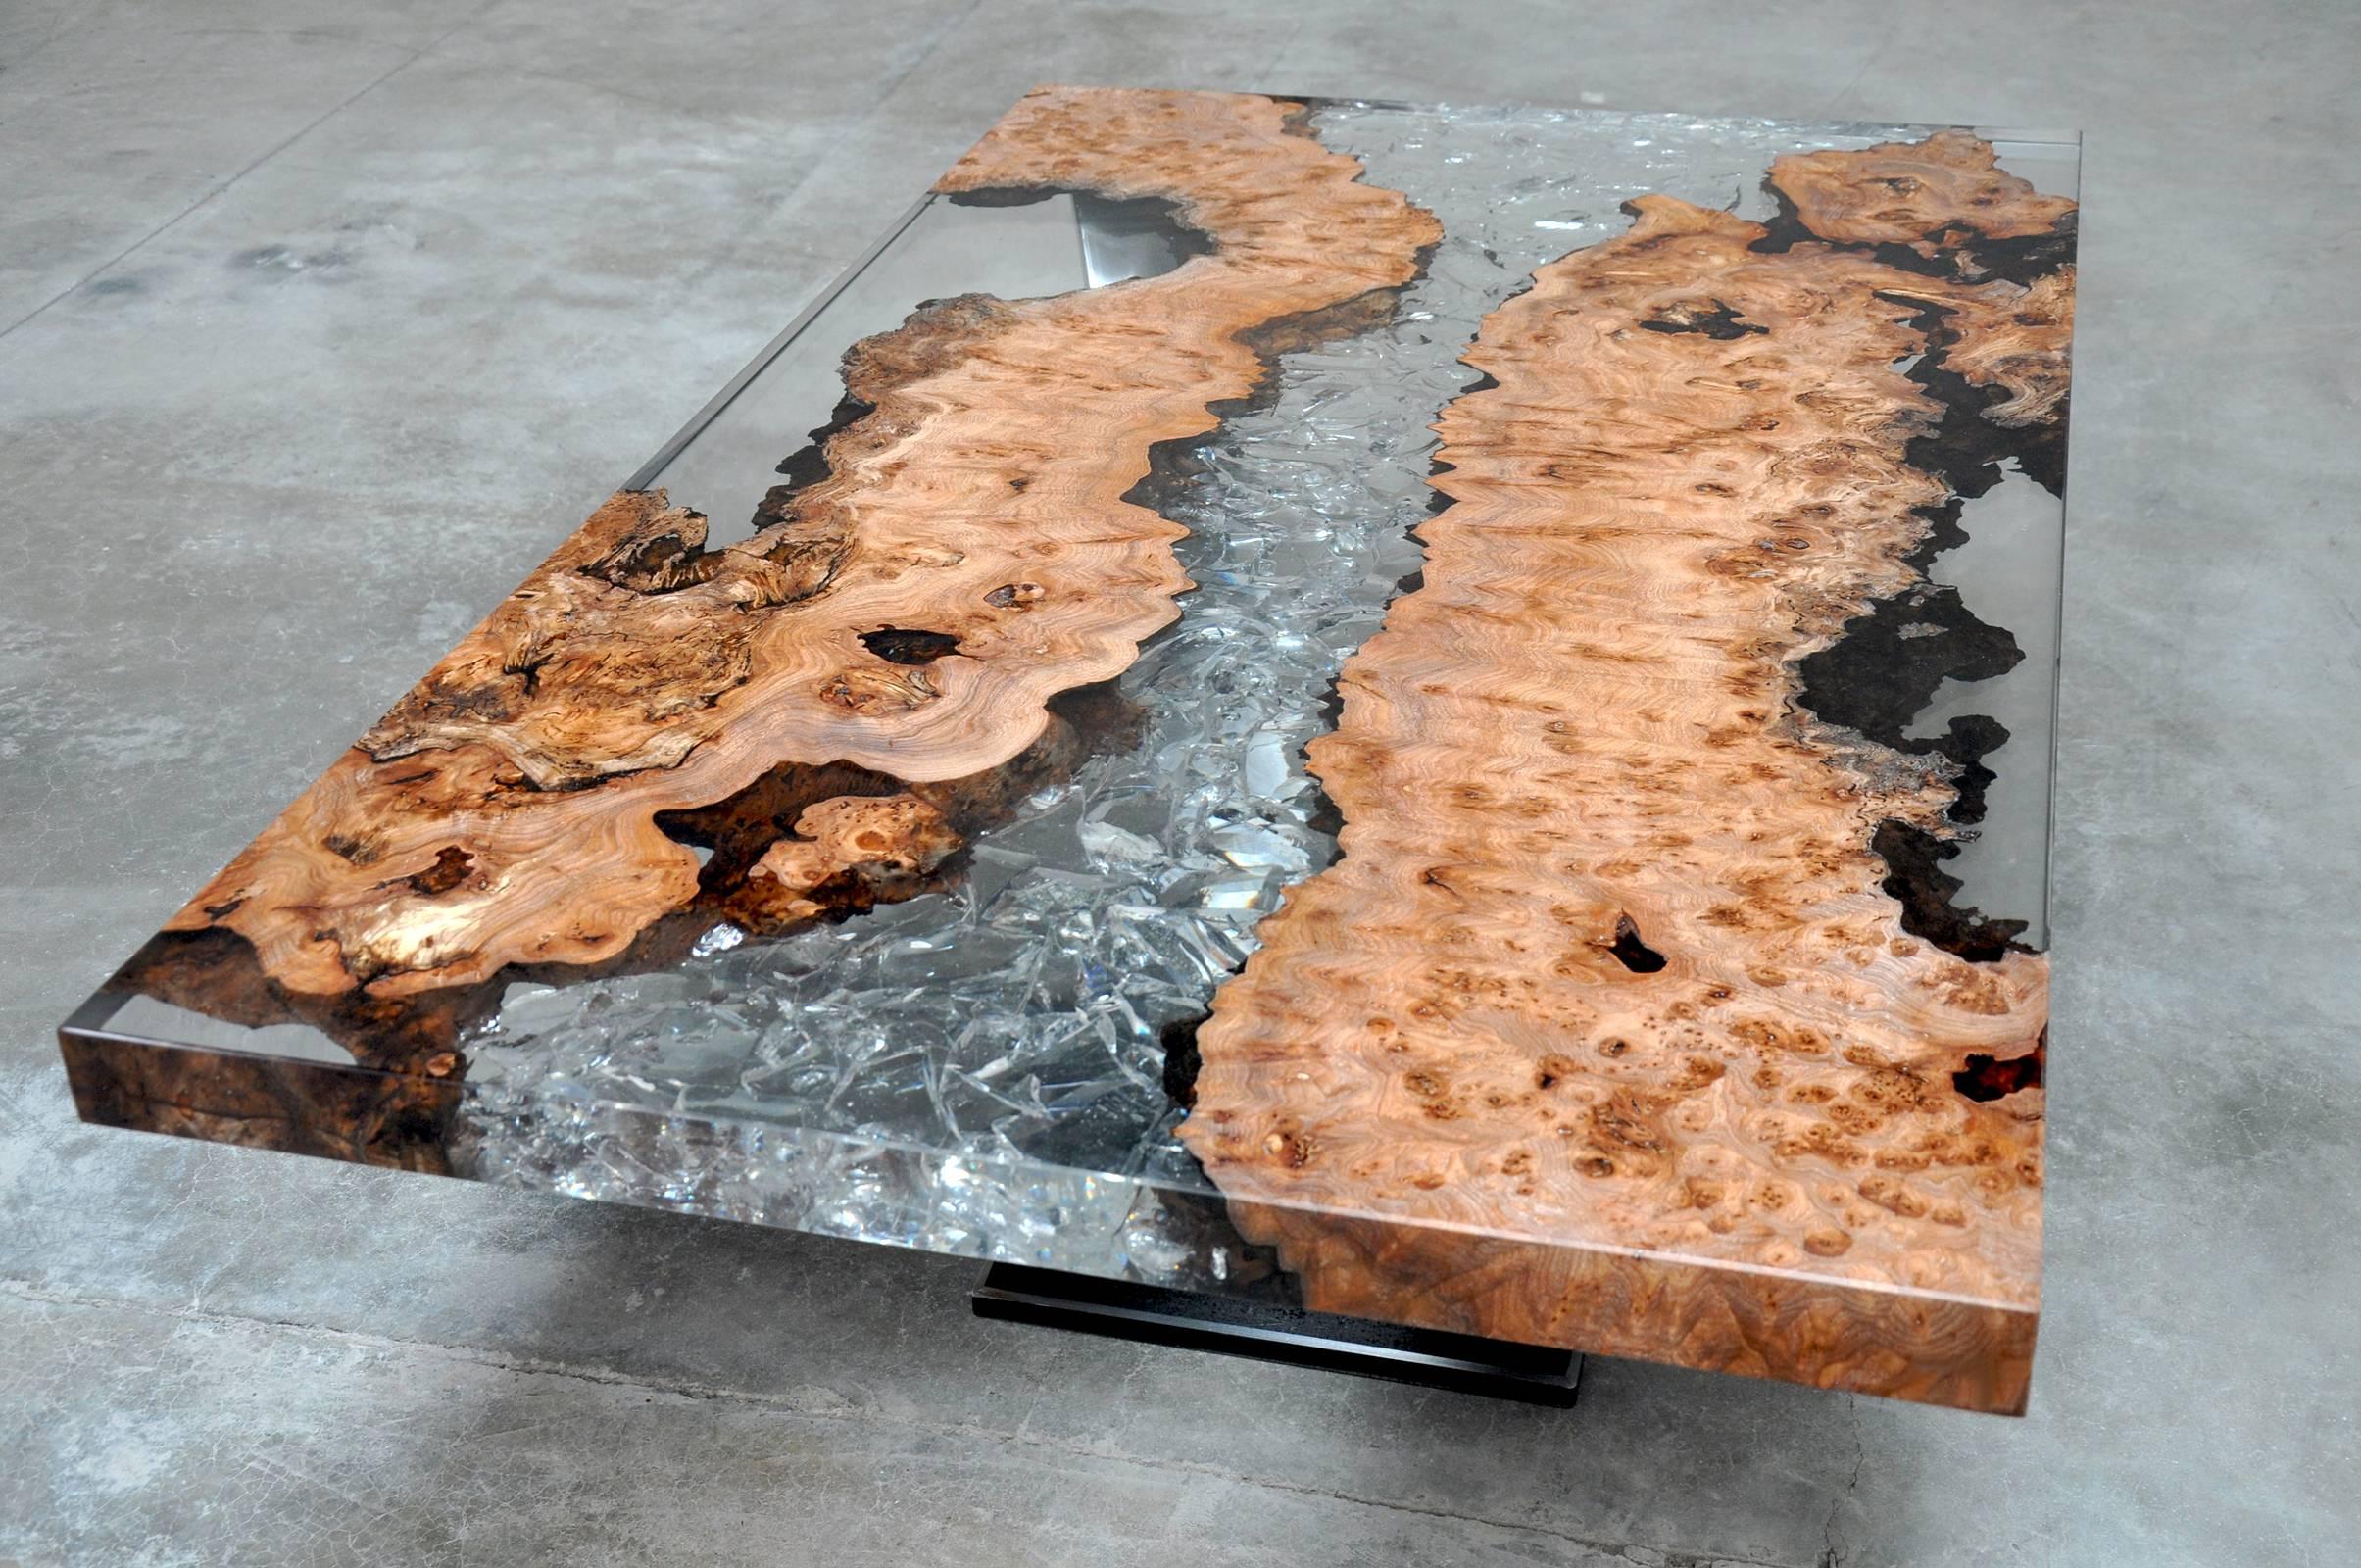 Coffee table elm brambles and glacier resin in solid elm wood made
with the cut of elm brambles and sealed in a transparent resin solid
glacier aspect. Ice sensation by cracking resin on the central part of
the coffee table. Base composed of